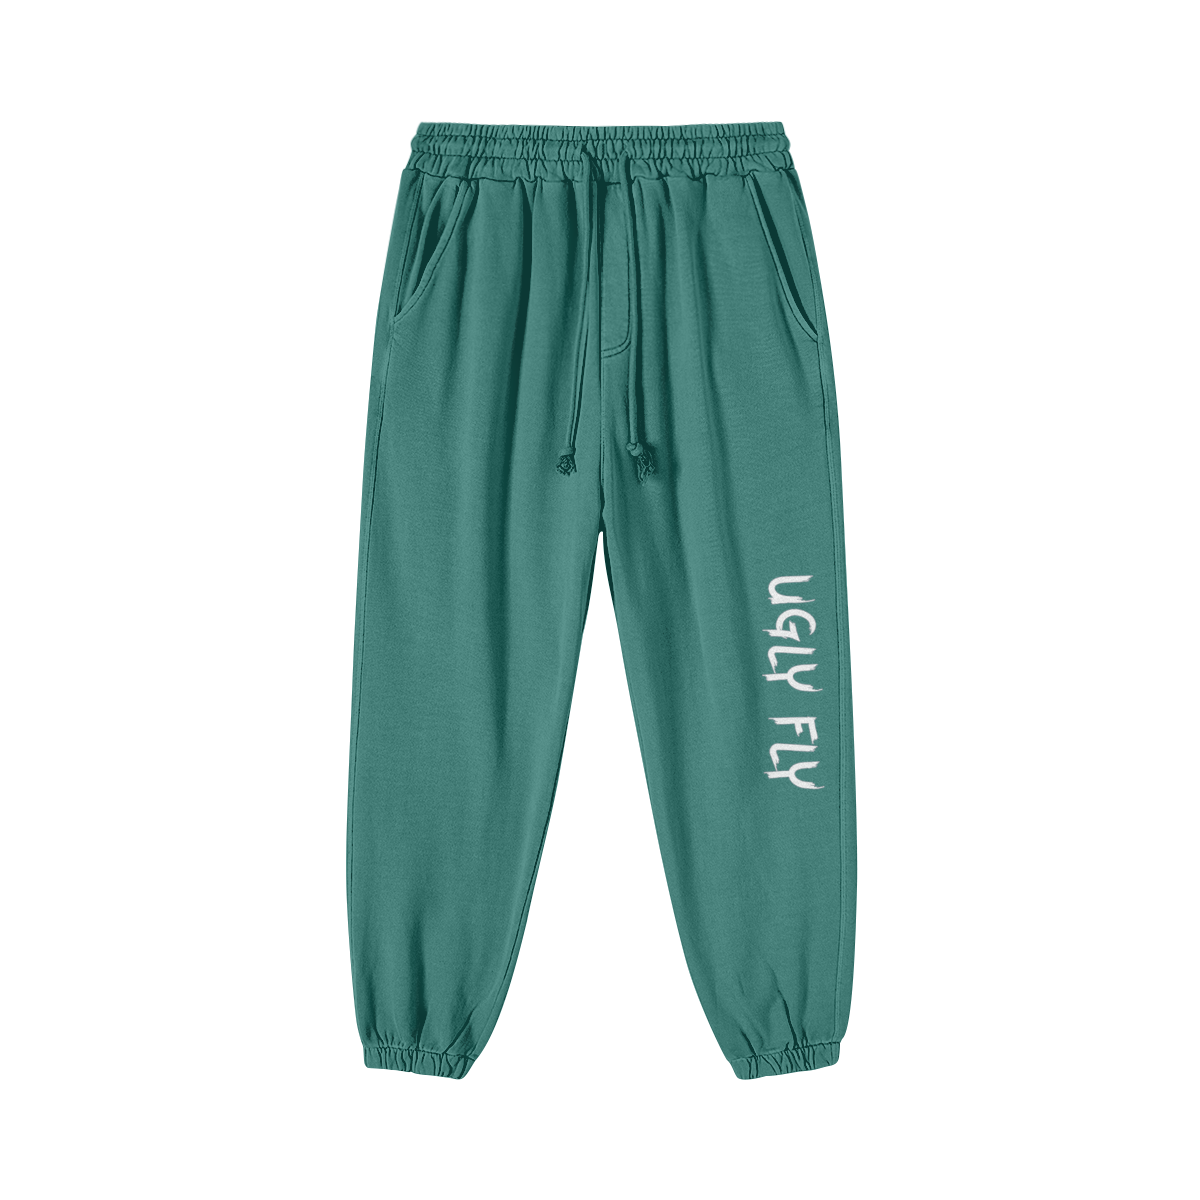 Wintergreen Dream Ugly Fly Unisex Super Heavyweight Washed Baggy Sweatpants - unisex sweatpants at TFC&H Co.